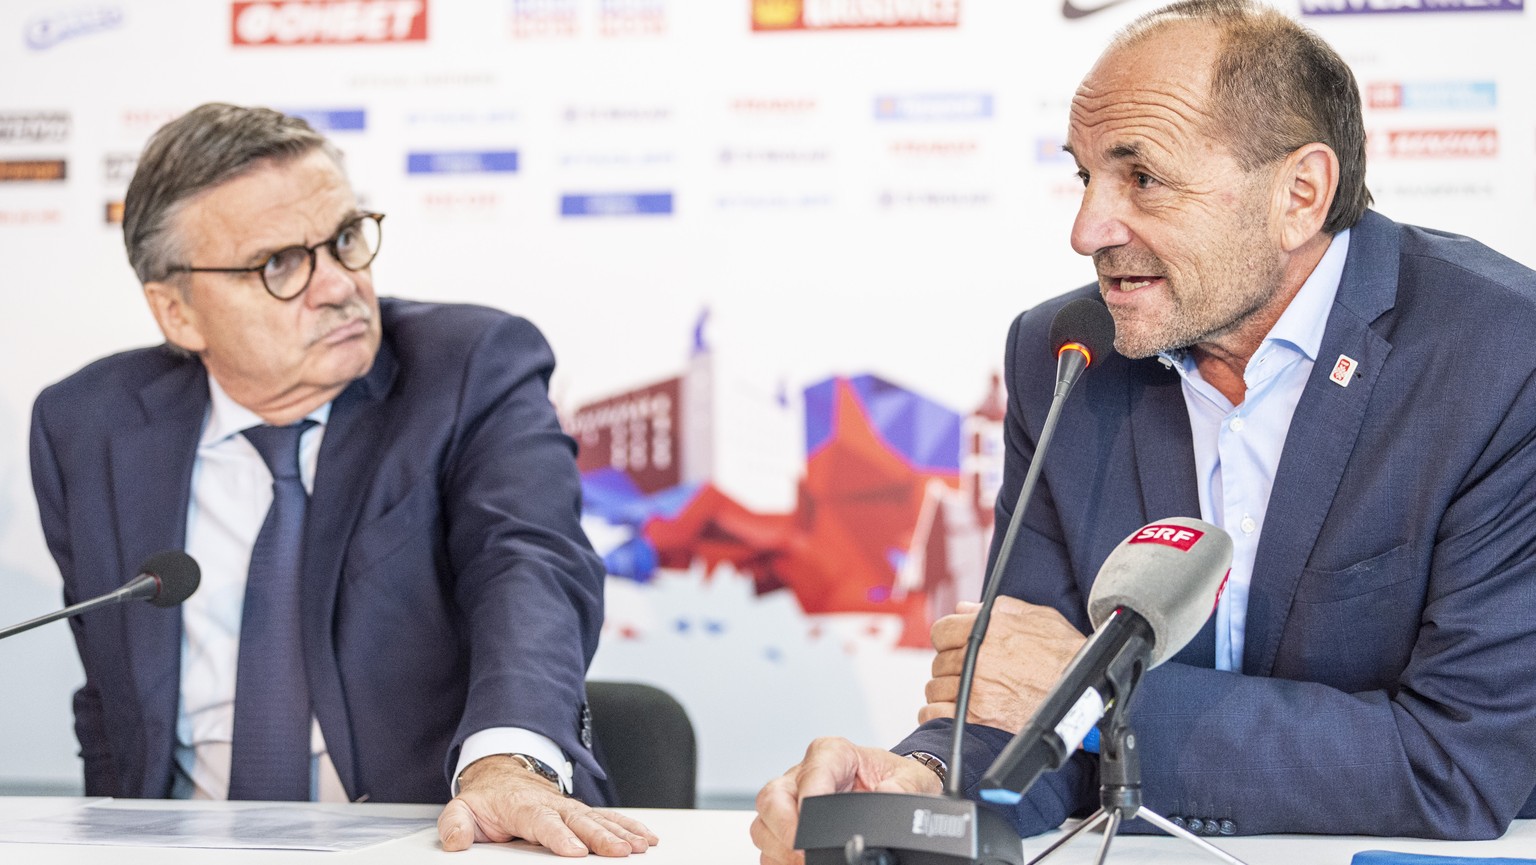 IIHF President Rene Fasel and Gian Gilli, General Secretary IIFH 2020, from left, during the press conference at the IIHF 2019 World Ice Hockey Championships, at the Ondrej Nepela Arena in Bratislava, ...